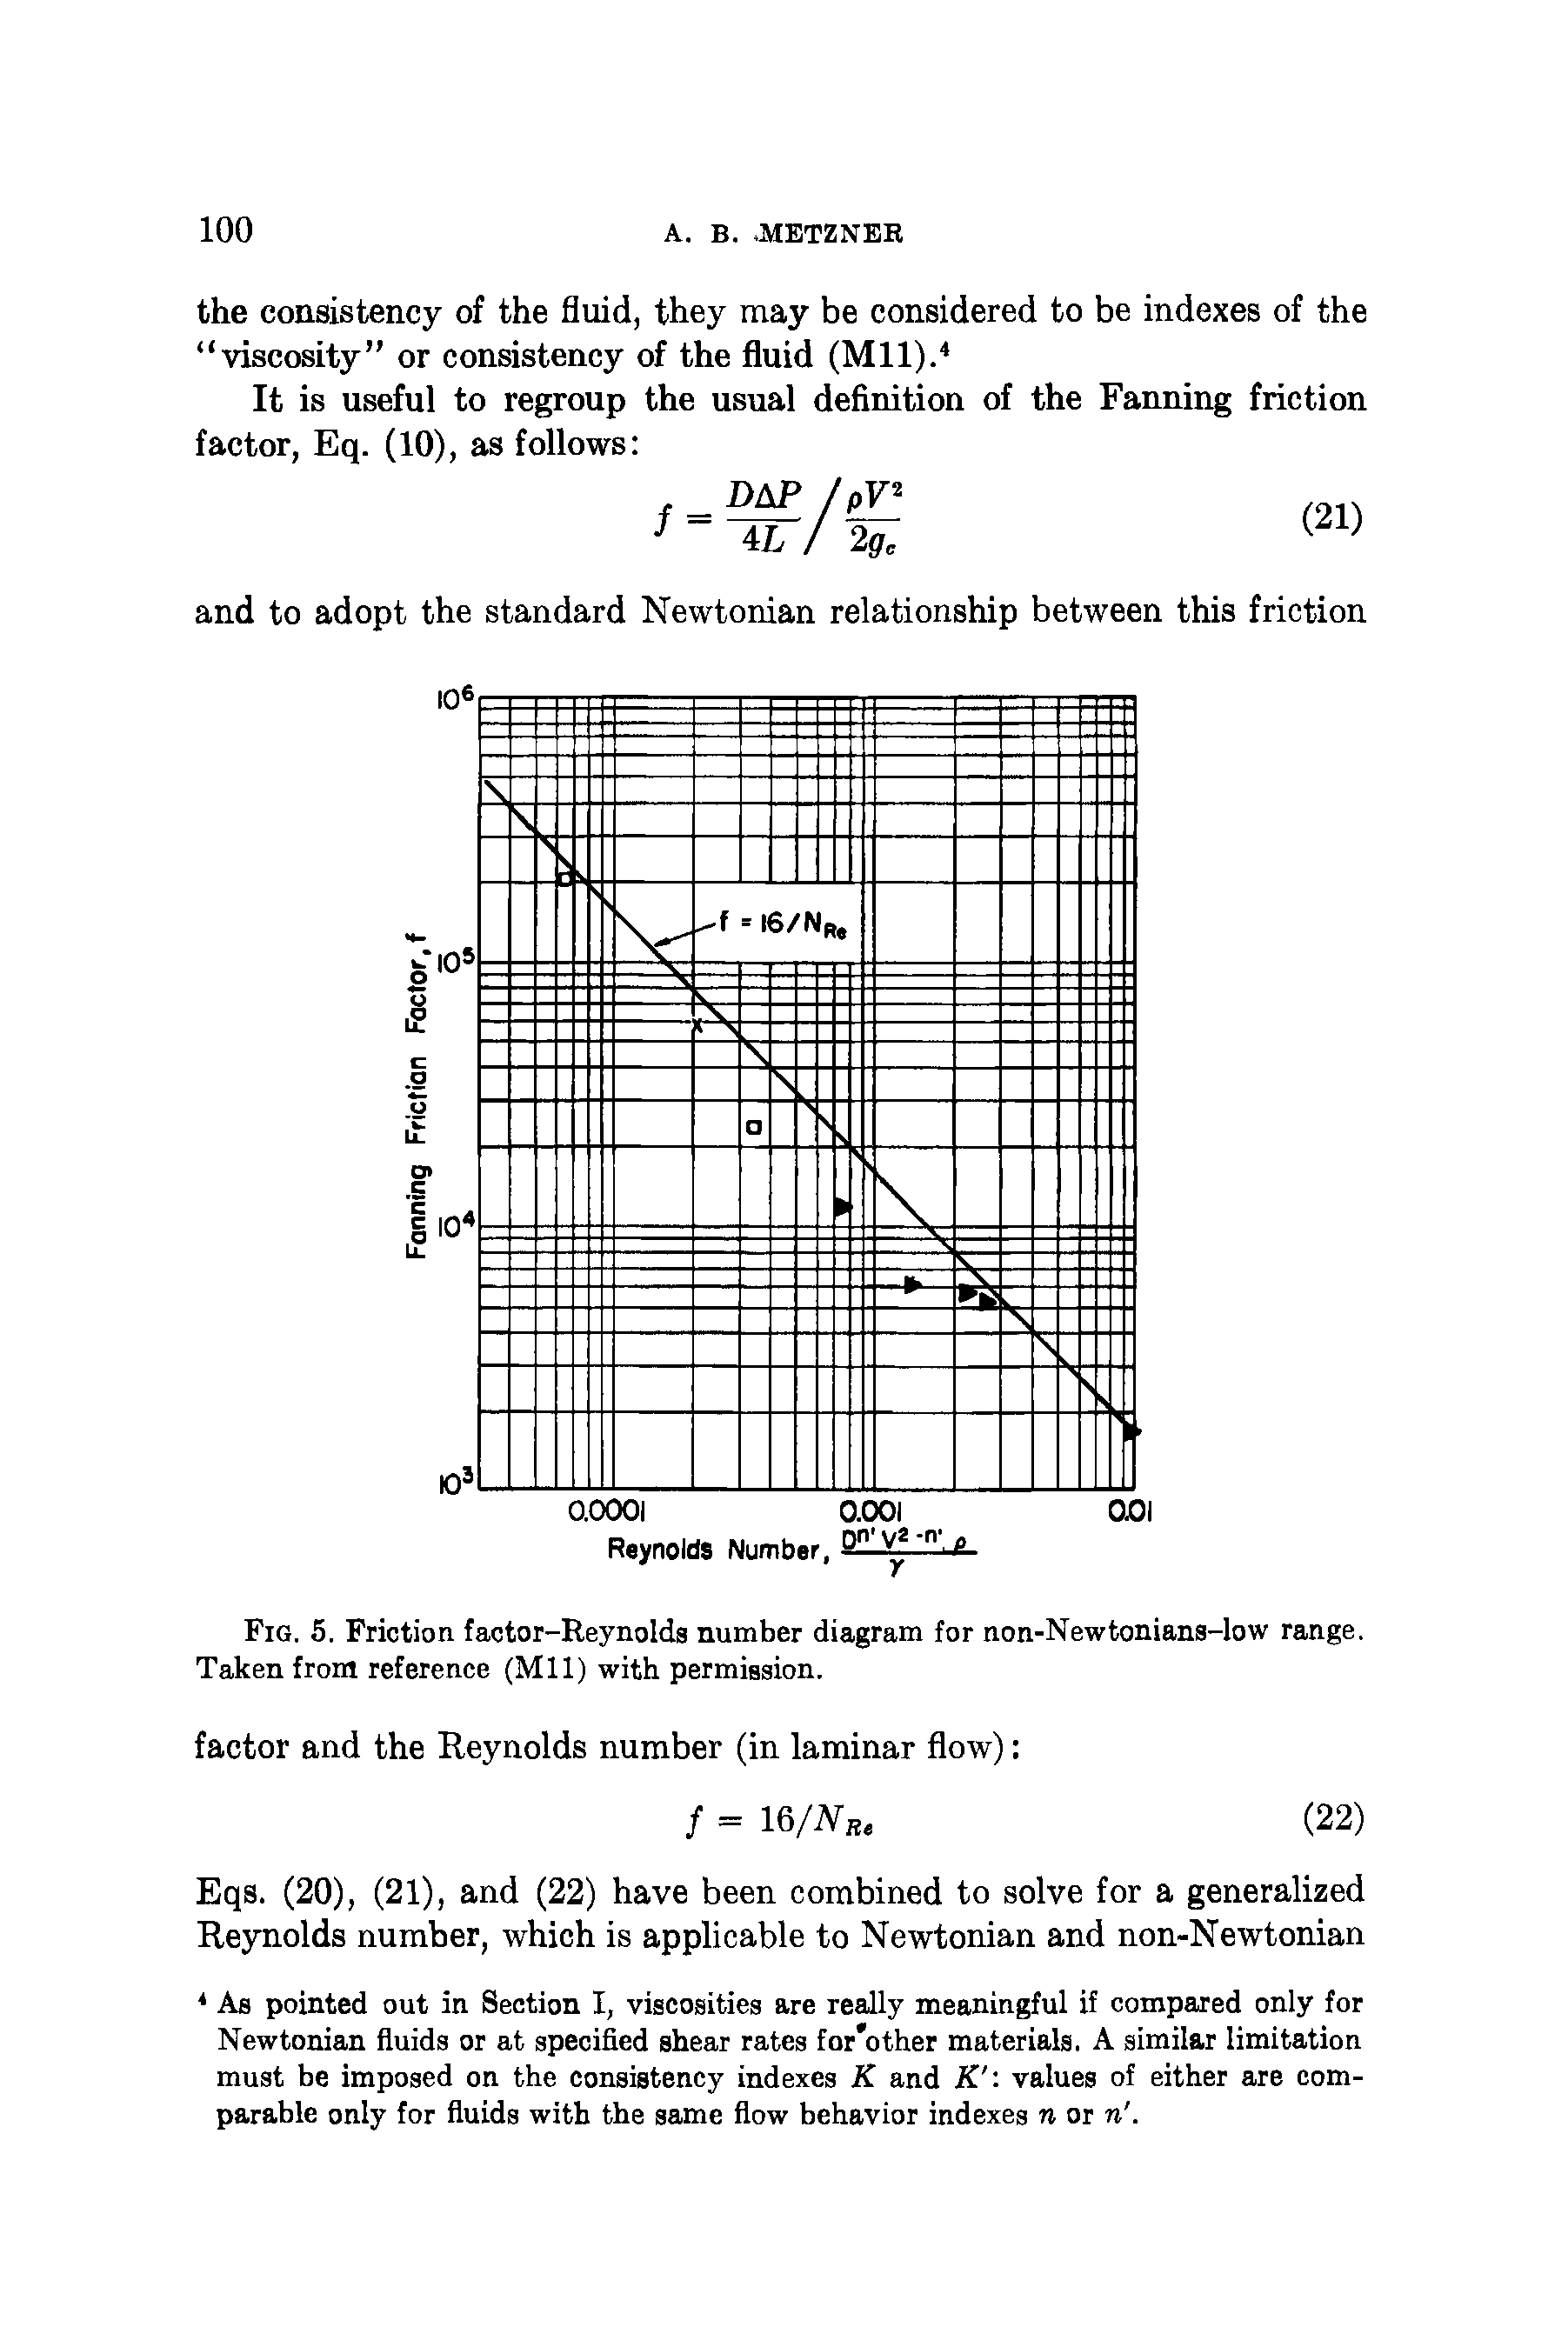 Fig. 5. Friction factor-Reynolds number diagram for non-Newtonians-low range. Taken from reference (Mil) with permission.